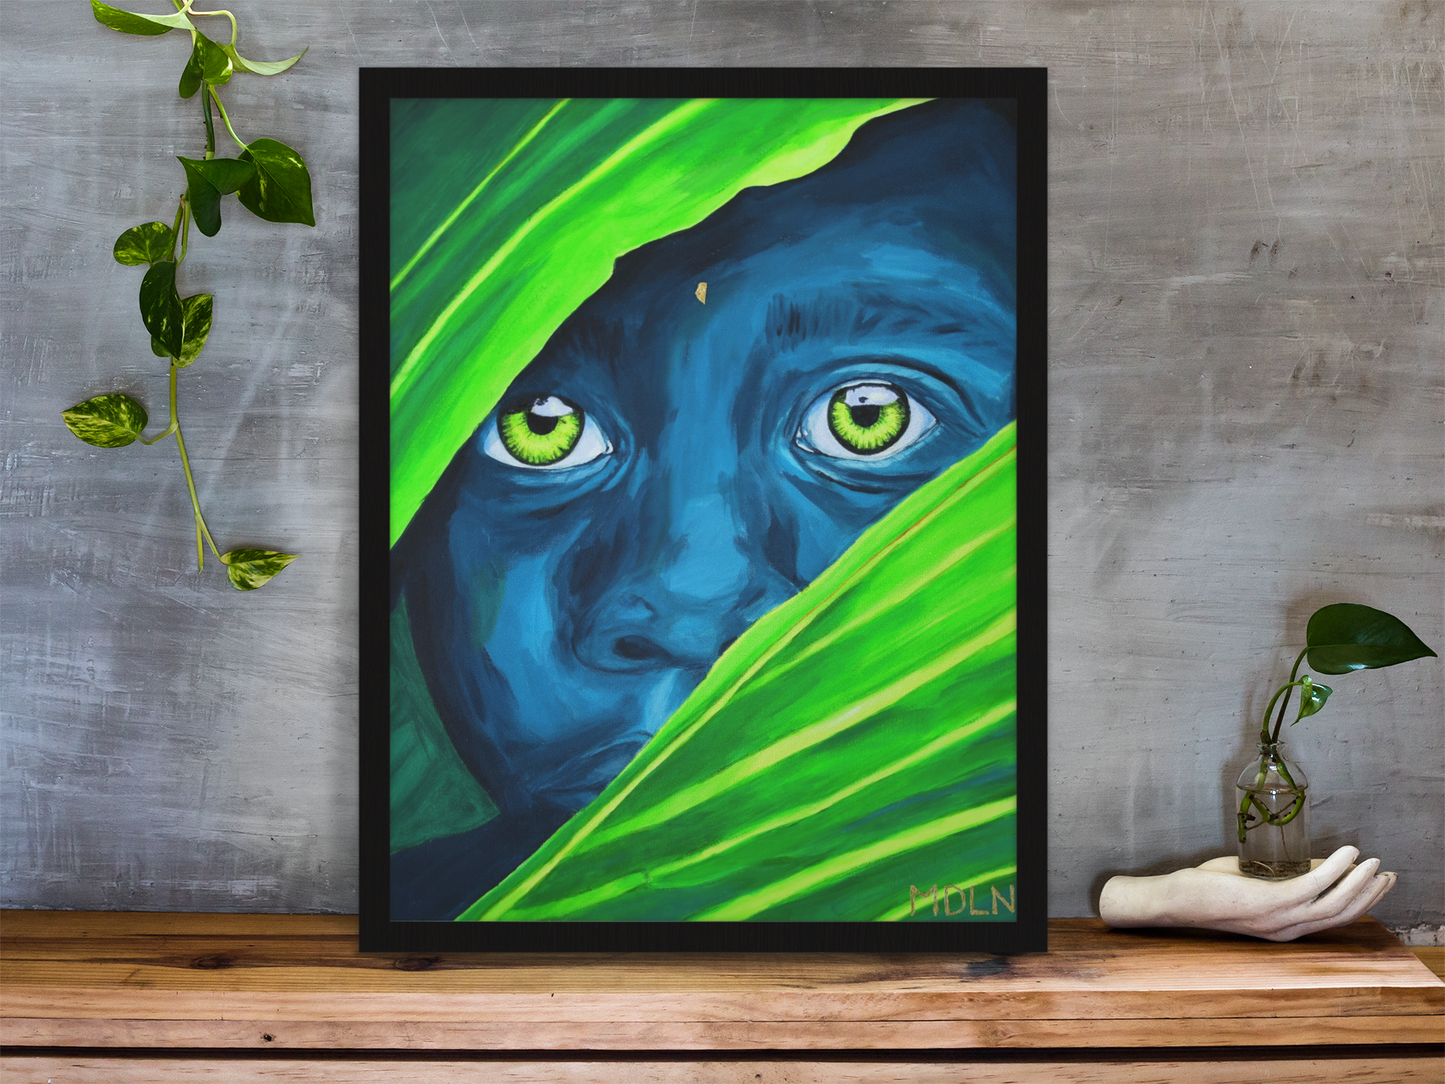 An original acrylic painting of an a young African Child with bright eyes peaking out from beyond some palm leaves, sitting on a table 